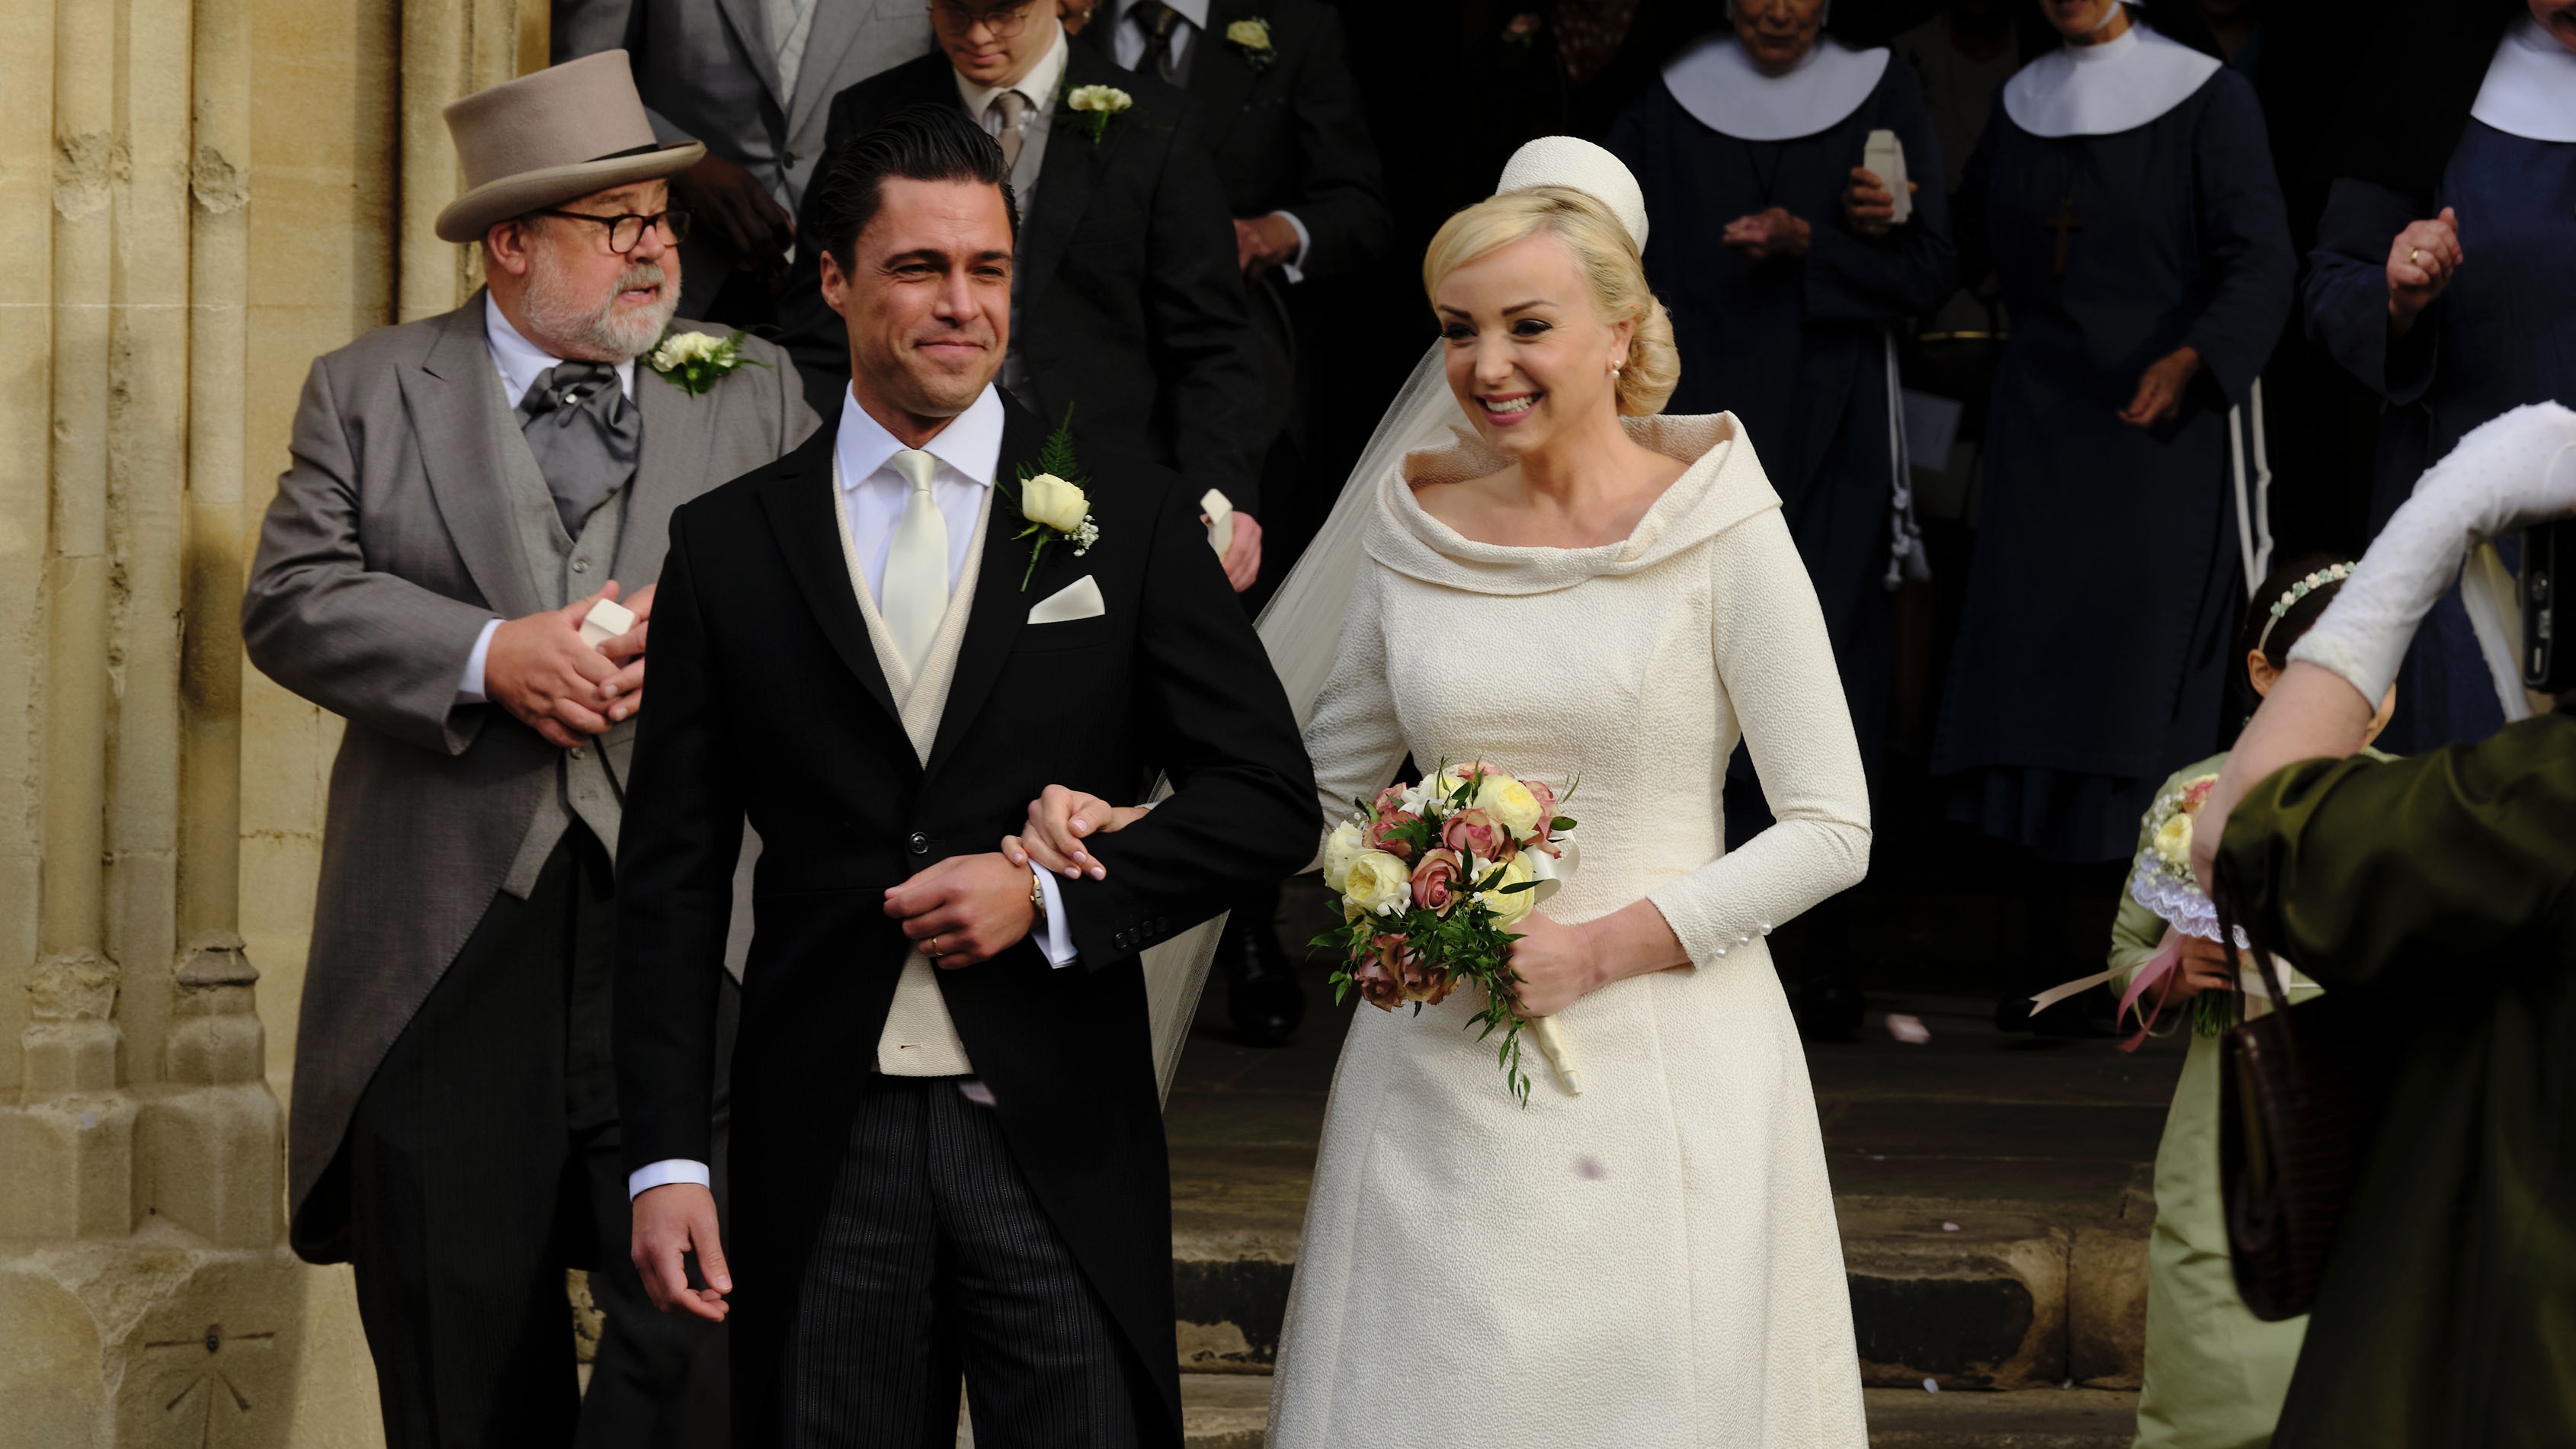 Olly Rix and Helen George as Matthew and Trixie in wedding clothes stand outside a church in Call the Midwife